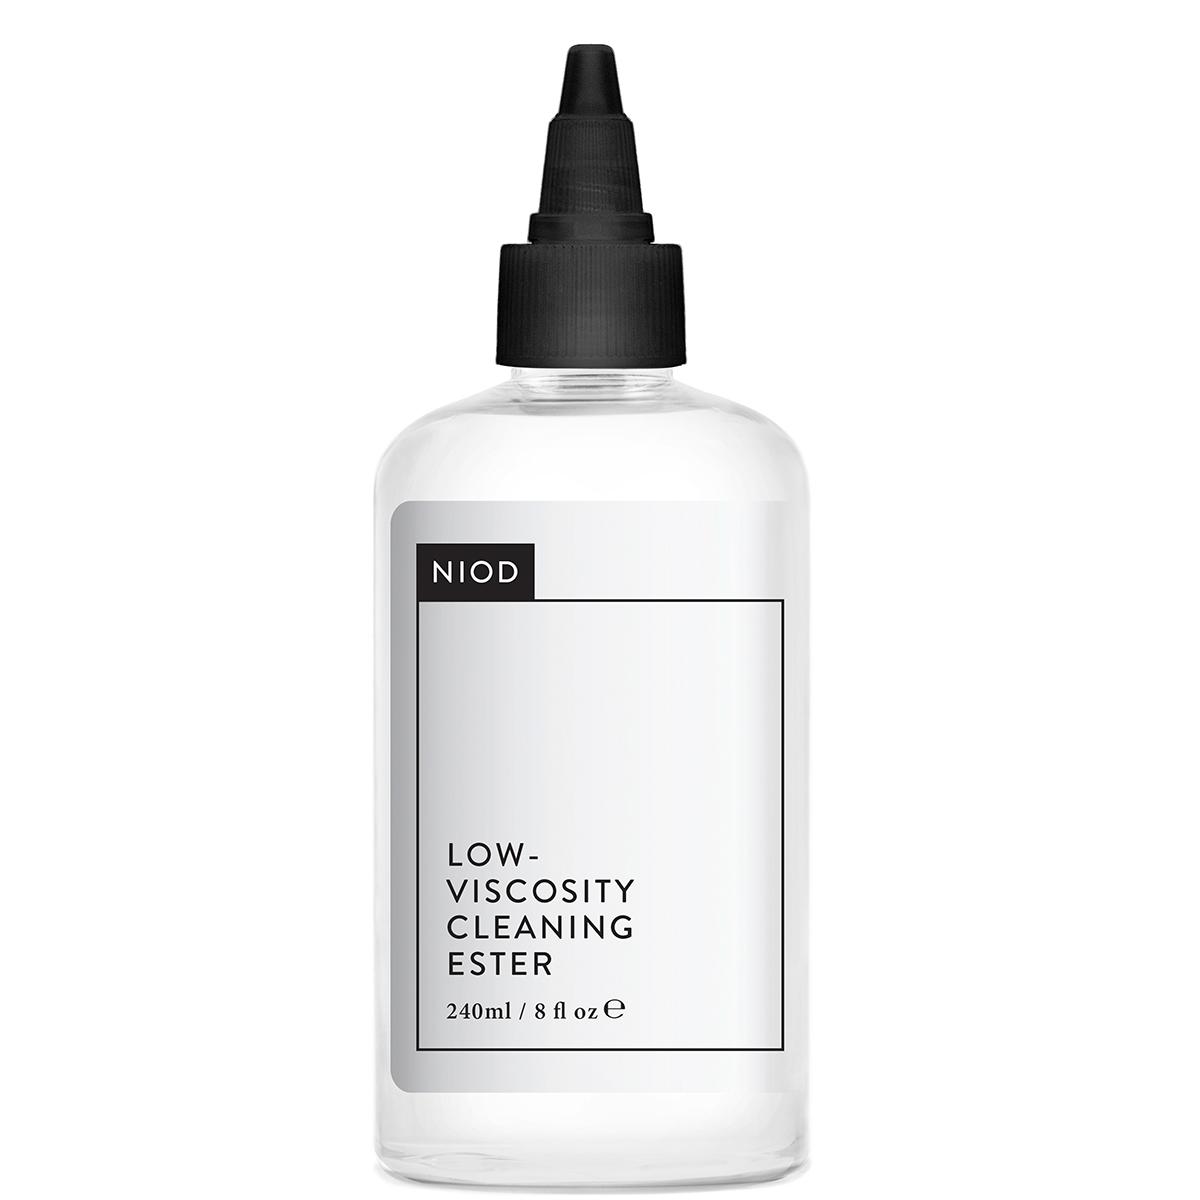 Niod Low-Viscosity Cleaning Ester